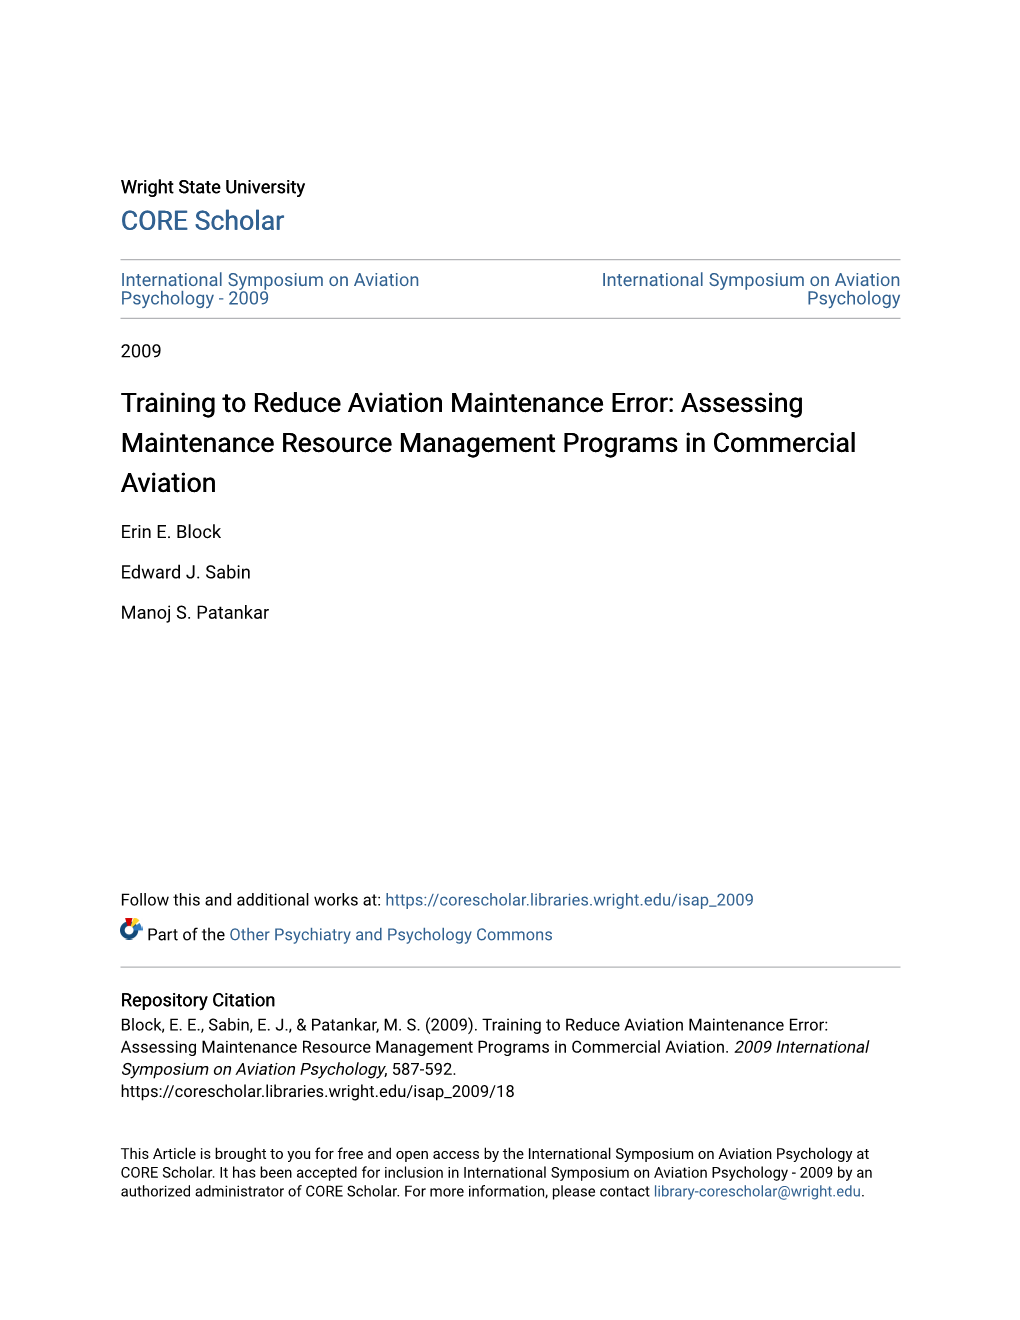 Training to Reduce Aviation Maintenance Error: Assessing Maintenance Resource Management Programs in Commercial Aviation